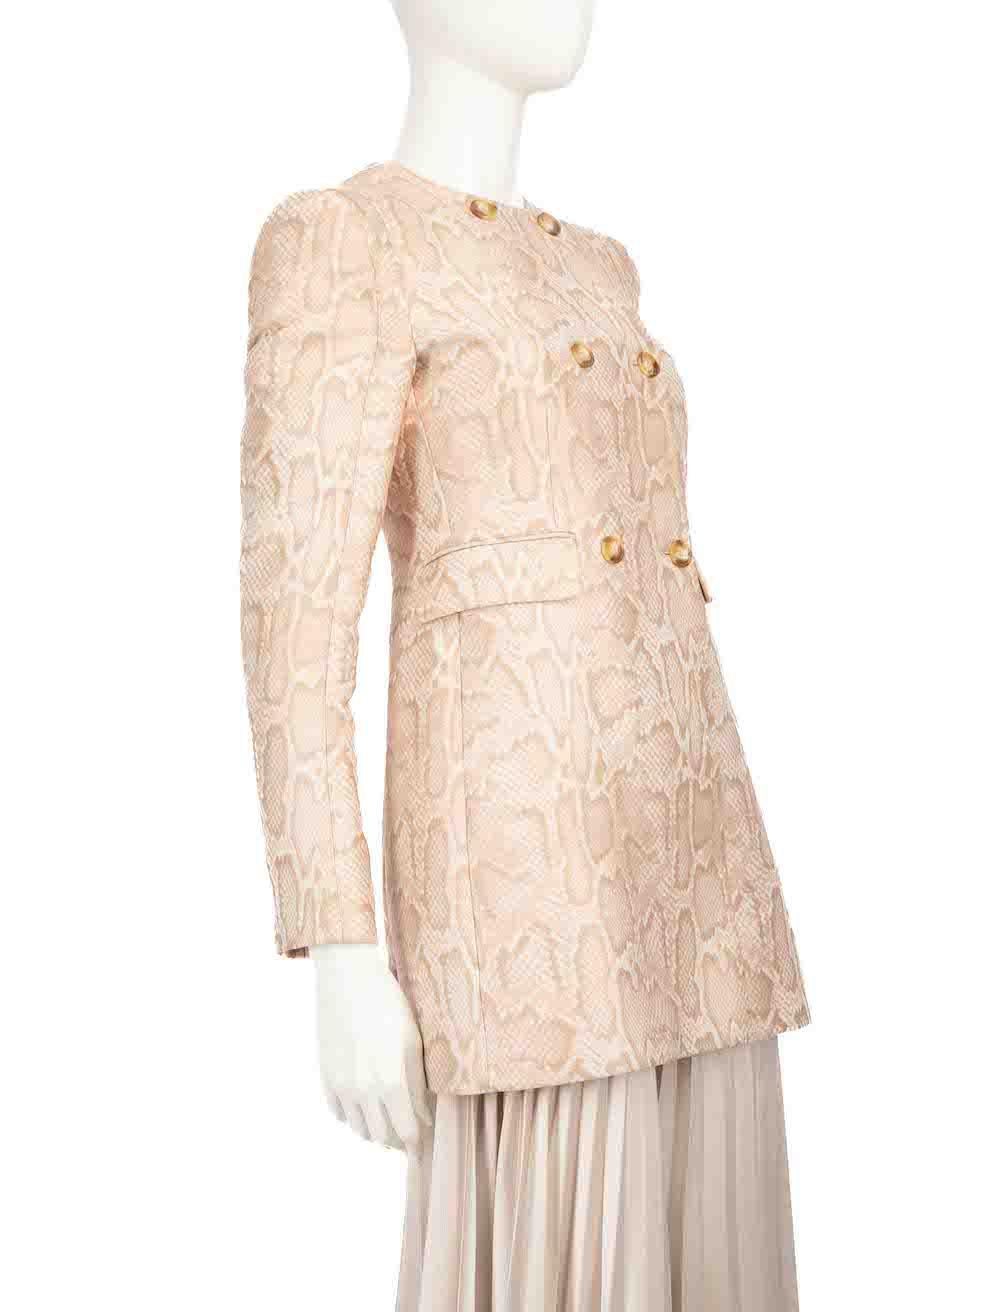 CONDITION is Very good. Minimal wear to coat is evident. Minimal wear to the front is seen with discolouration marks around the inner collar on this used Stella McCartney designer resale item.
 
 
 
 Details
 
 
 Beige
 
 Polyester
 
 Mid length